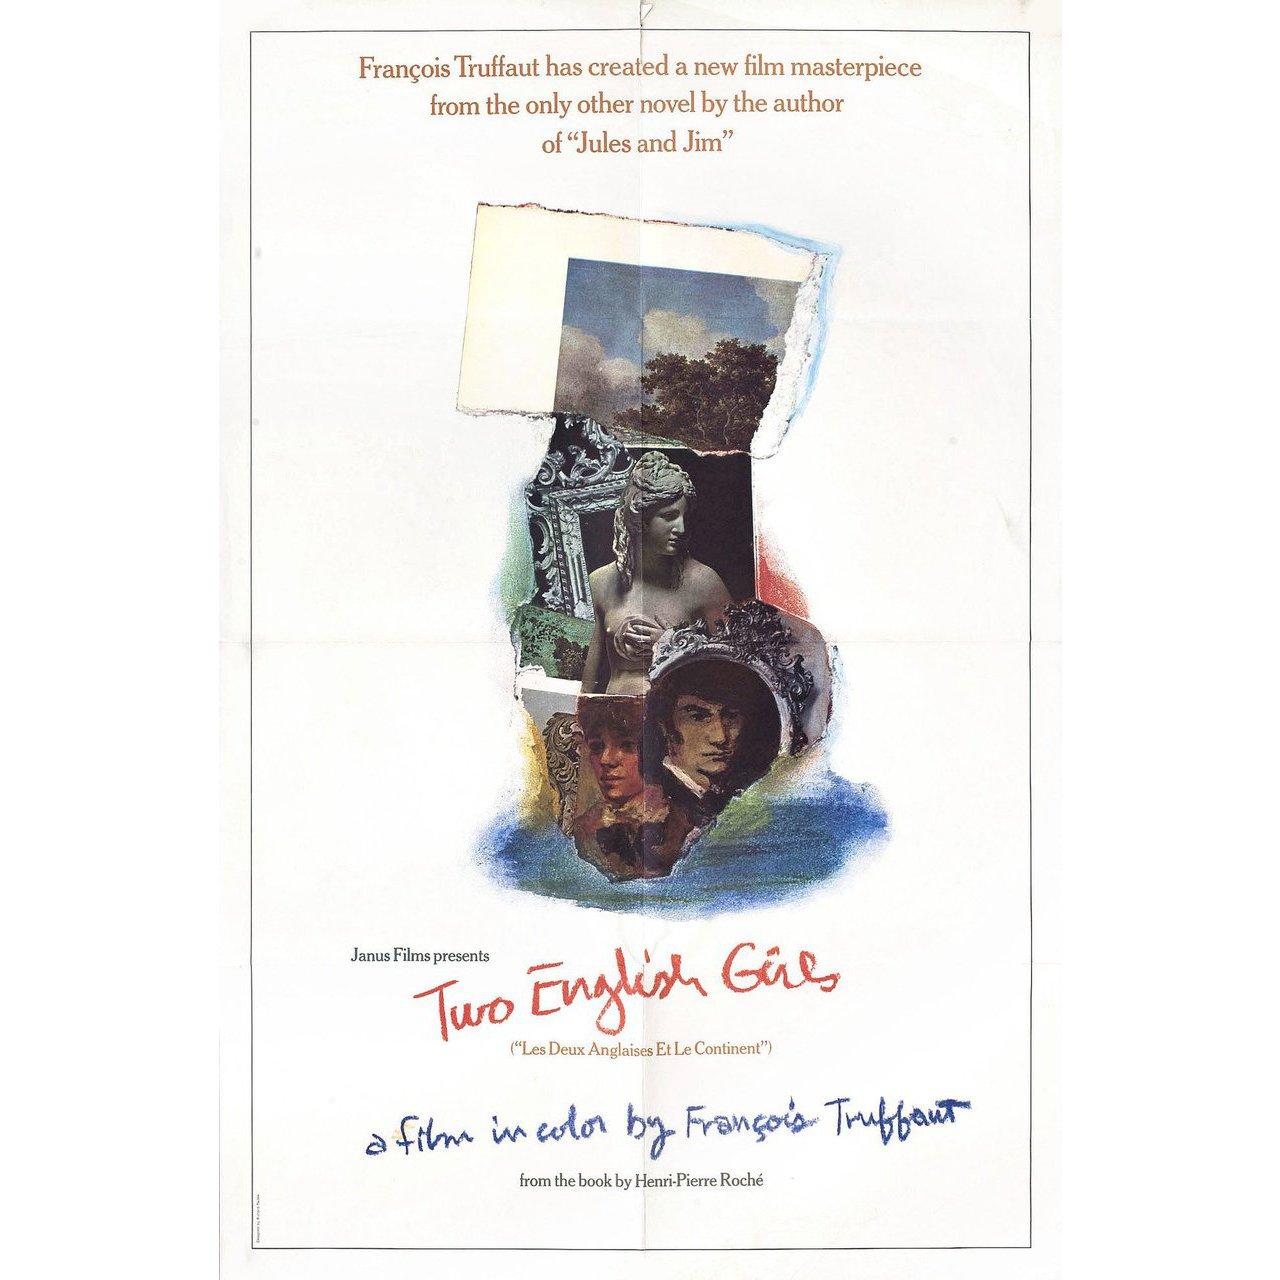 Original 1971 British one sheet poster by Richard Taddei for the film Two English Girls (Les deux Anglaises et le continent) directed by Francois Truffaut with Jean-Pierre Leaud / Kika Markham / Stacey Tendeter / Sylvia Marriott. Very good